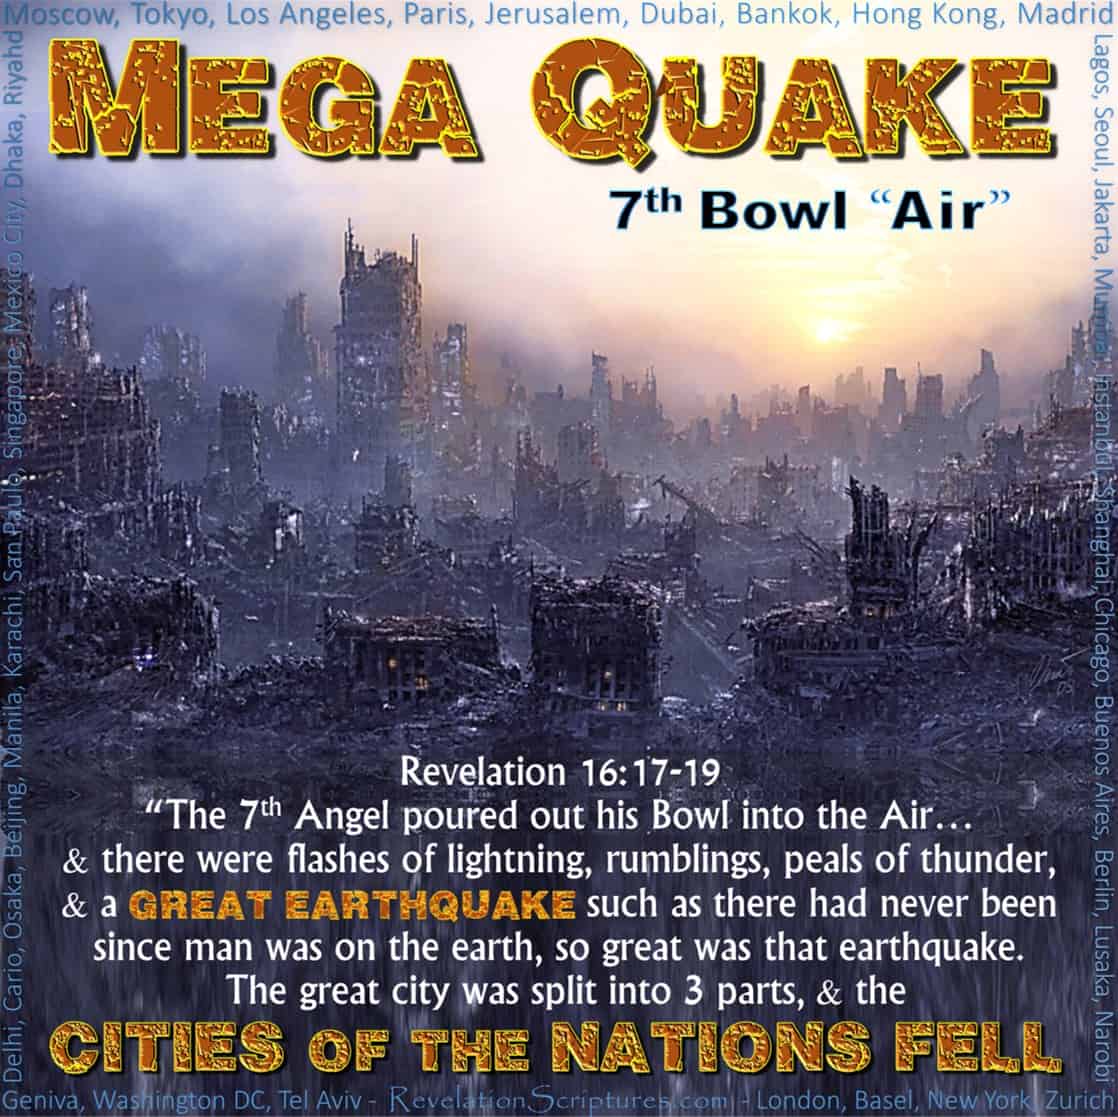 Seventh Bowl,7th Vail,7th Bowl,Vail.Wrath.Air.It is Done.Great Earthquake.City of Nations Fell.Island.Mountian.Babylon Remembered.Cup Wrath Hail.Book Revelation,Revelation Chapter 16, Mega Quake,Mega Earthquake,Global Earthquake